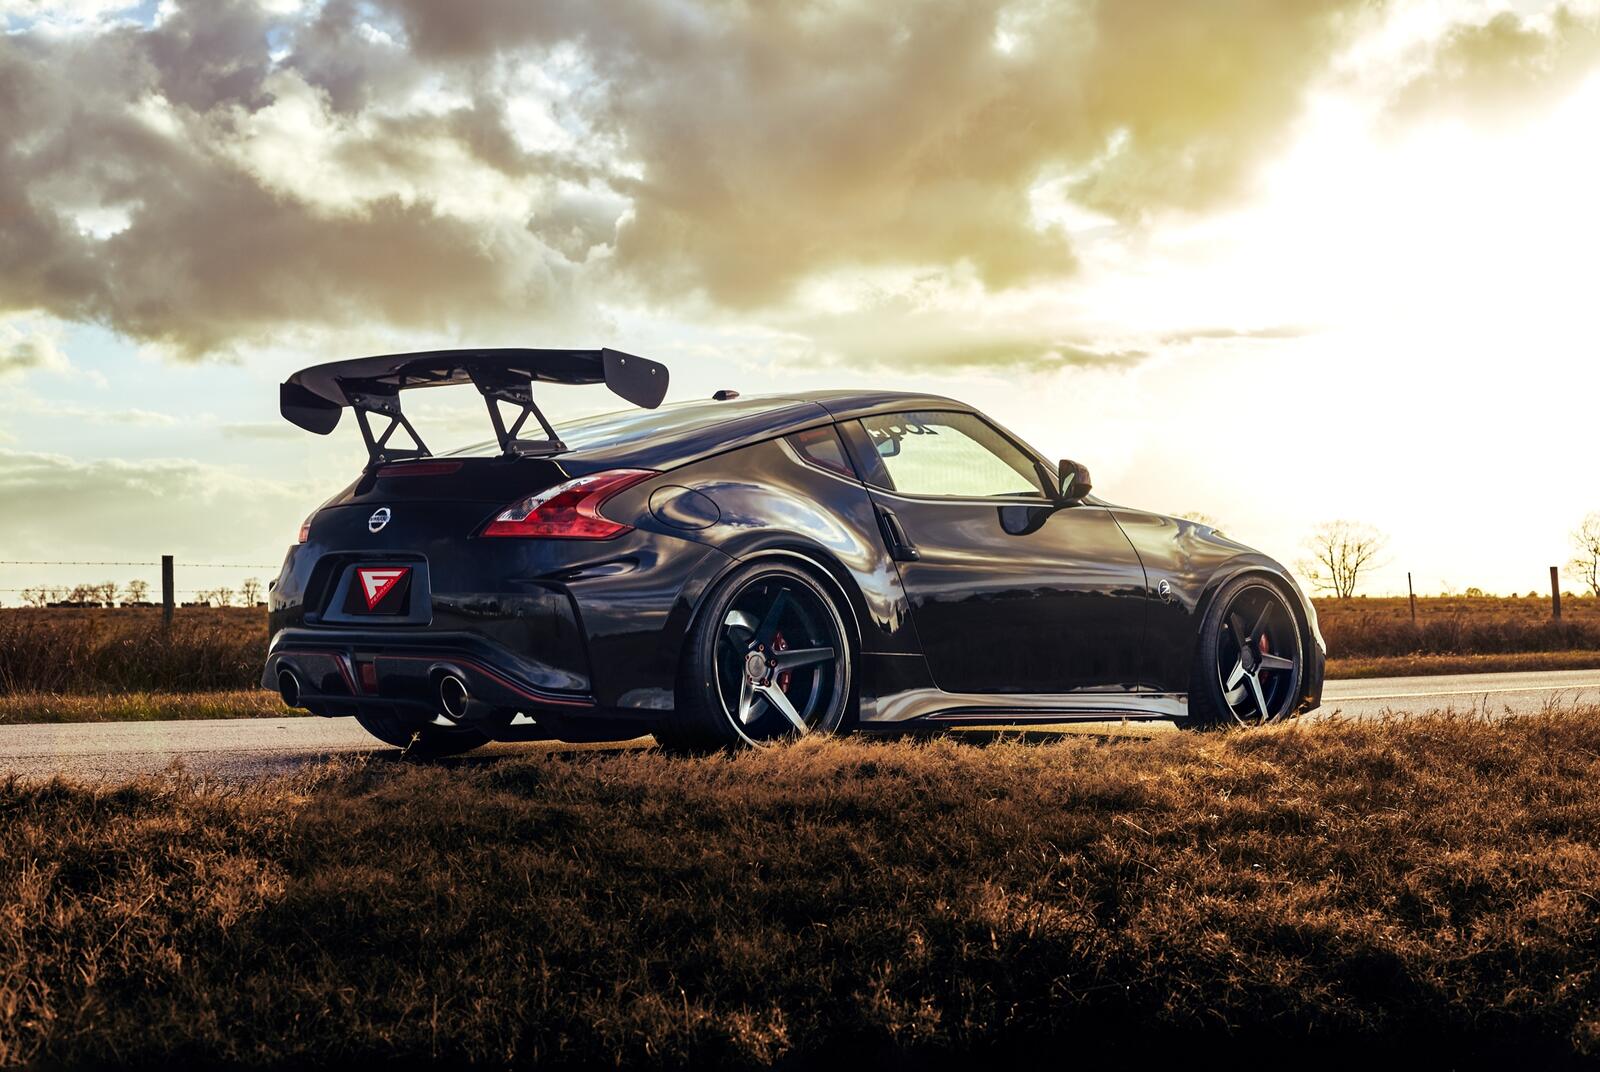 Wallpapers side view clouds nissan nismo 370z on the desktop